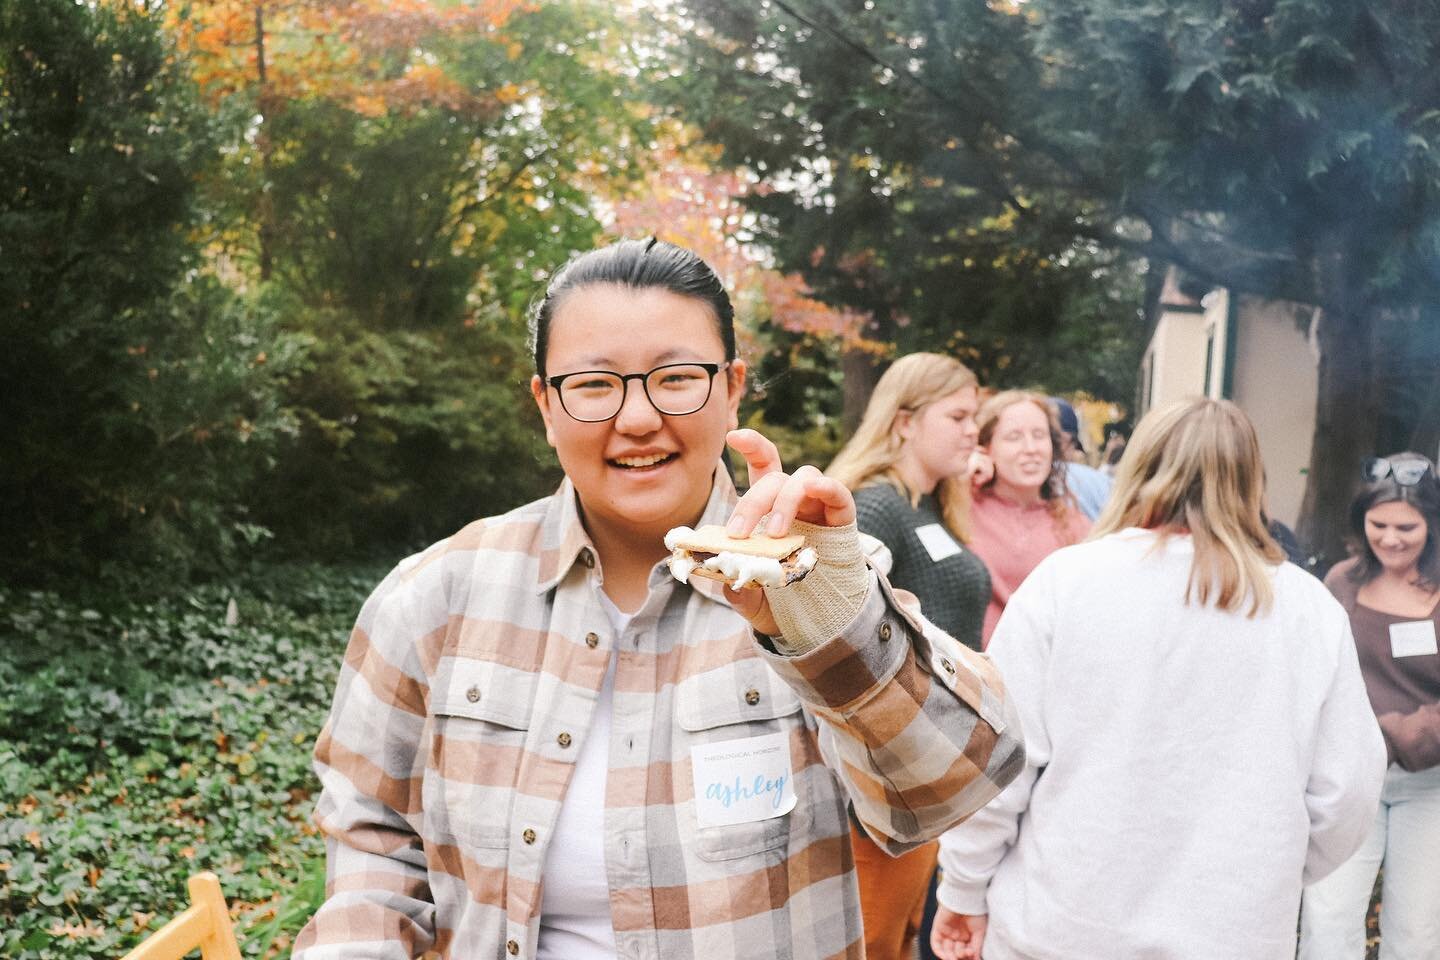 This Wednesday, add some joy to your reading day with s&rsquo;mores and a bonfire! Drop by the Bonhoeffer House (1841 University Circle) from 3-5pm Wed, Dec 7th.